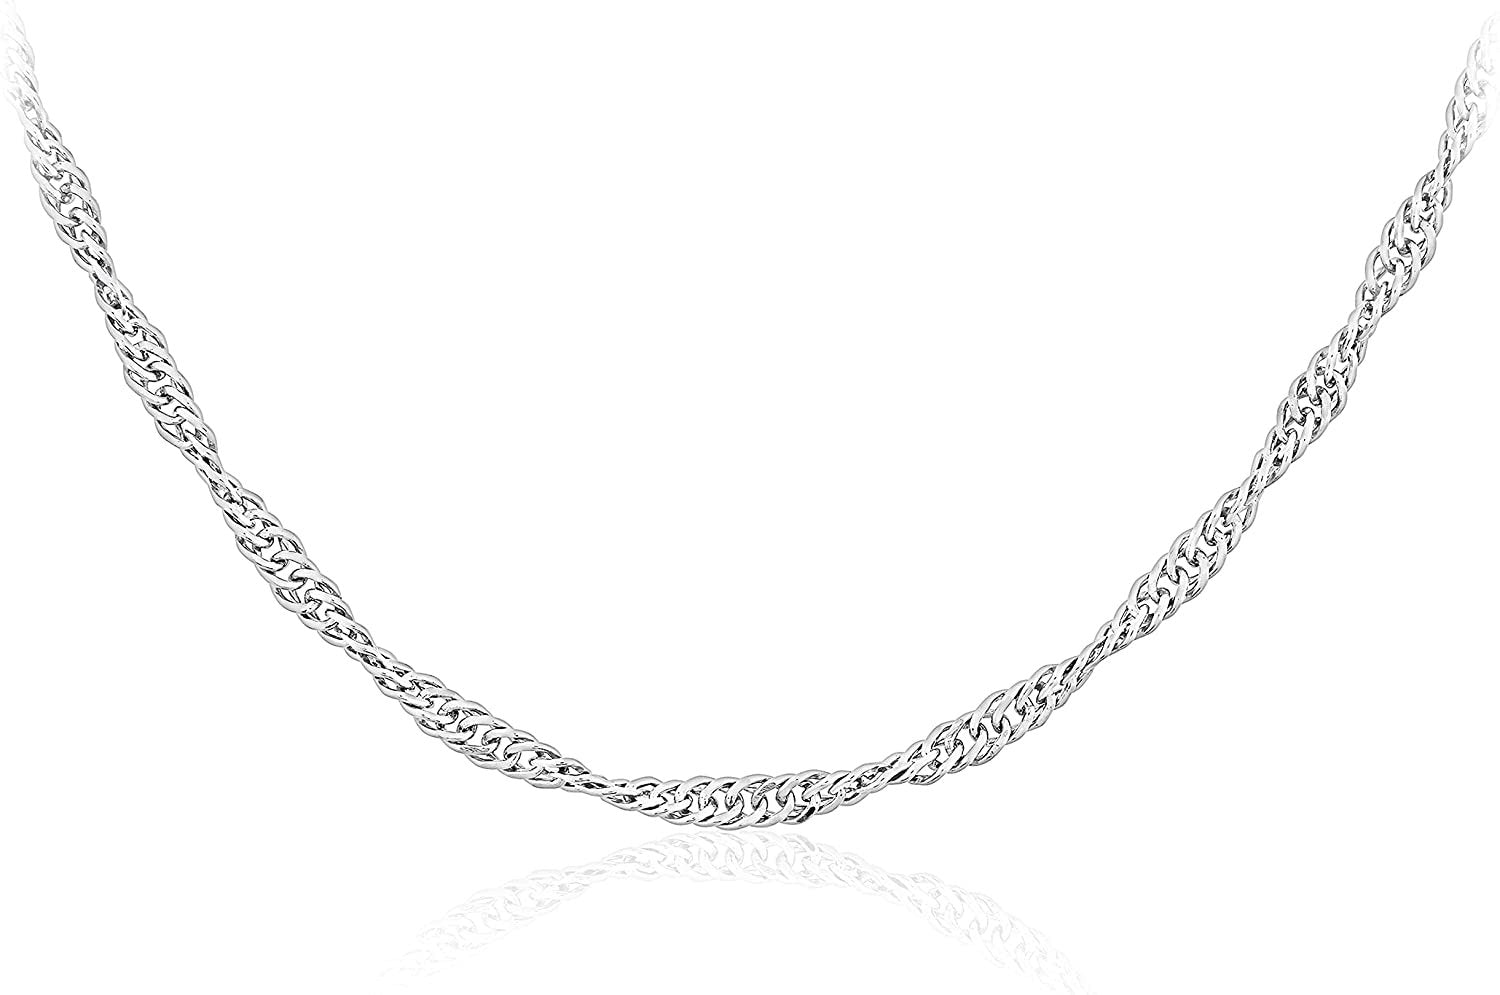 .925 Sterling Silver Singapore Chain Adjustable Length 18" - 20"